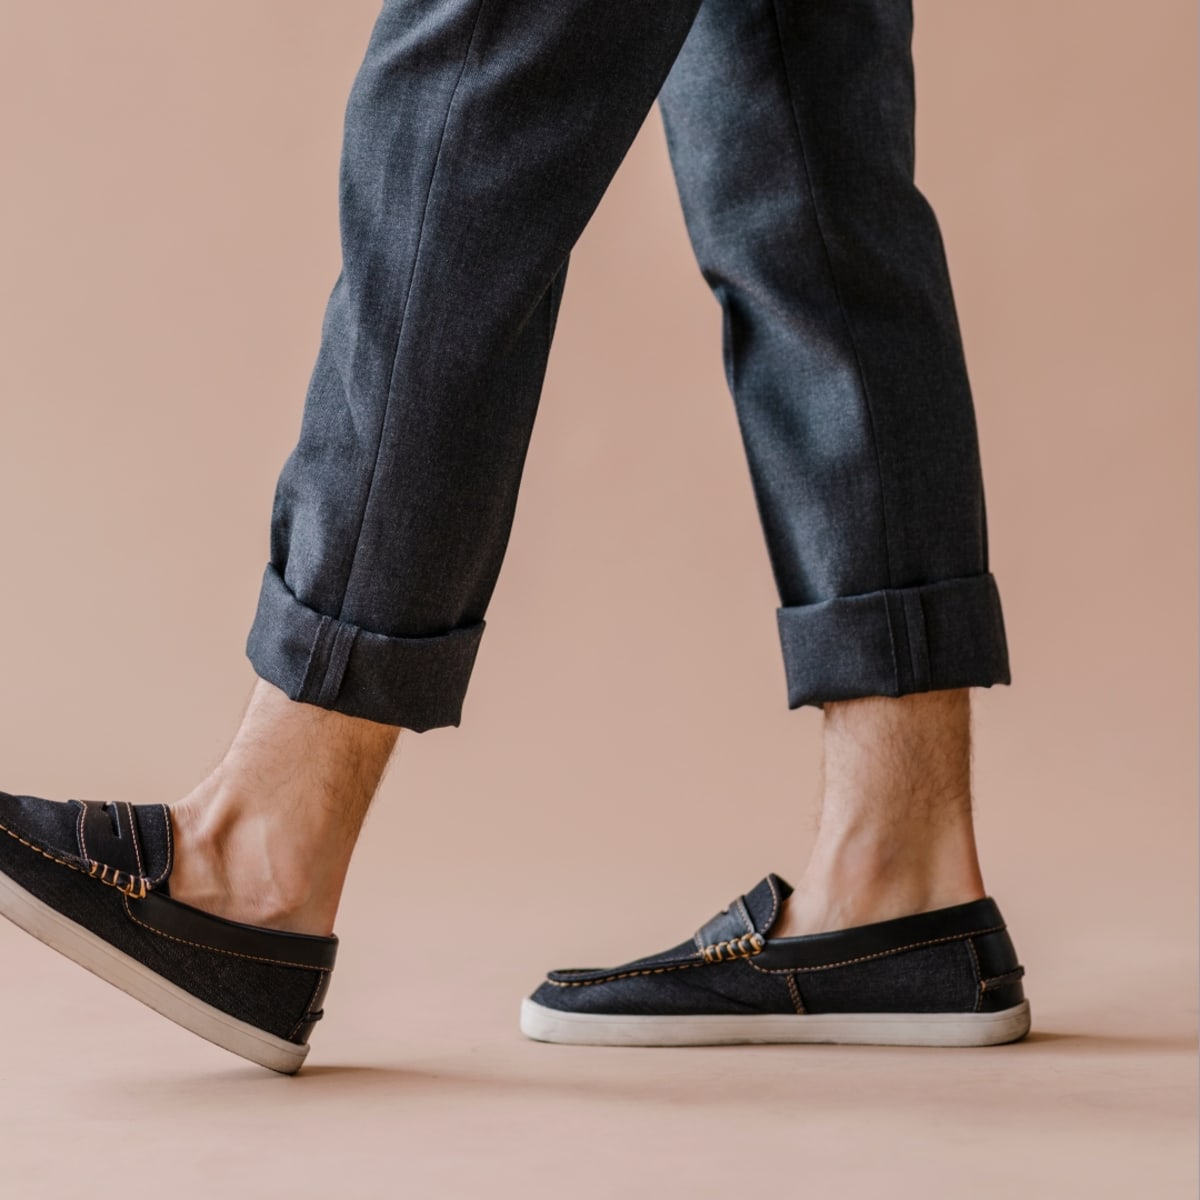 The Best Boat Shoes of 2023 - Men's Journal